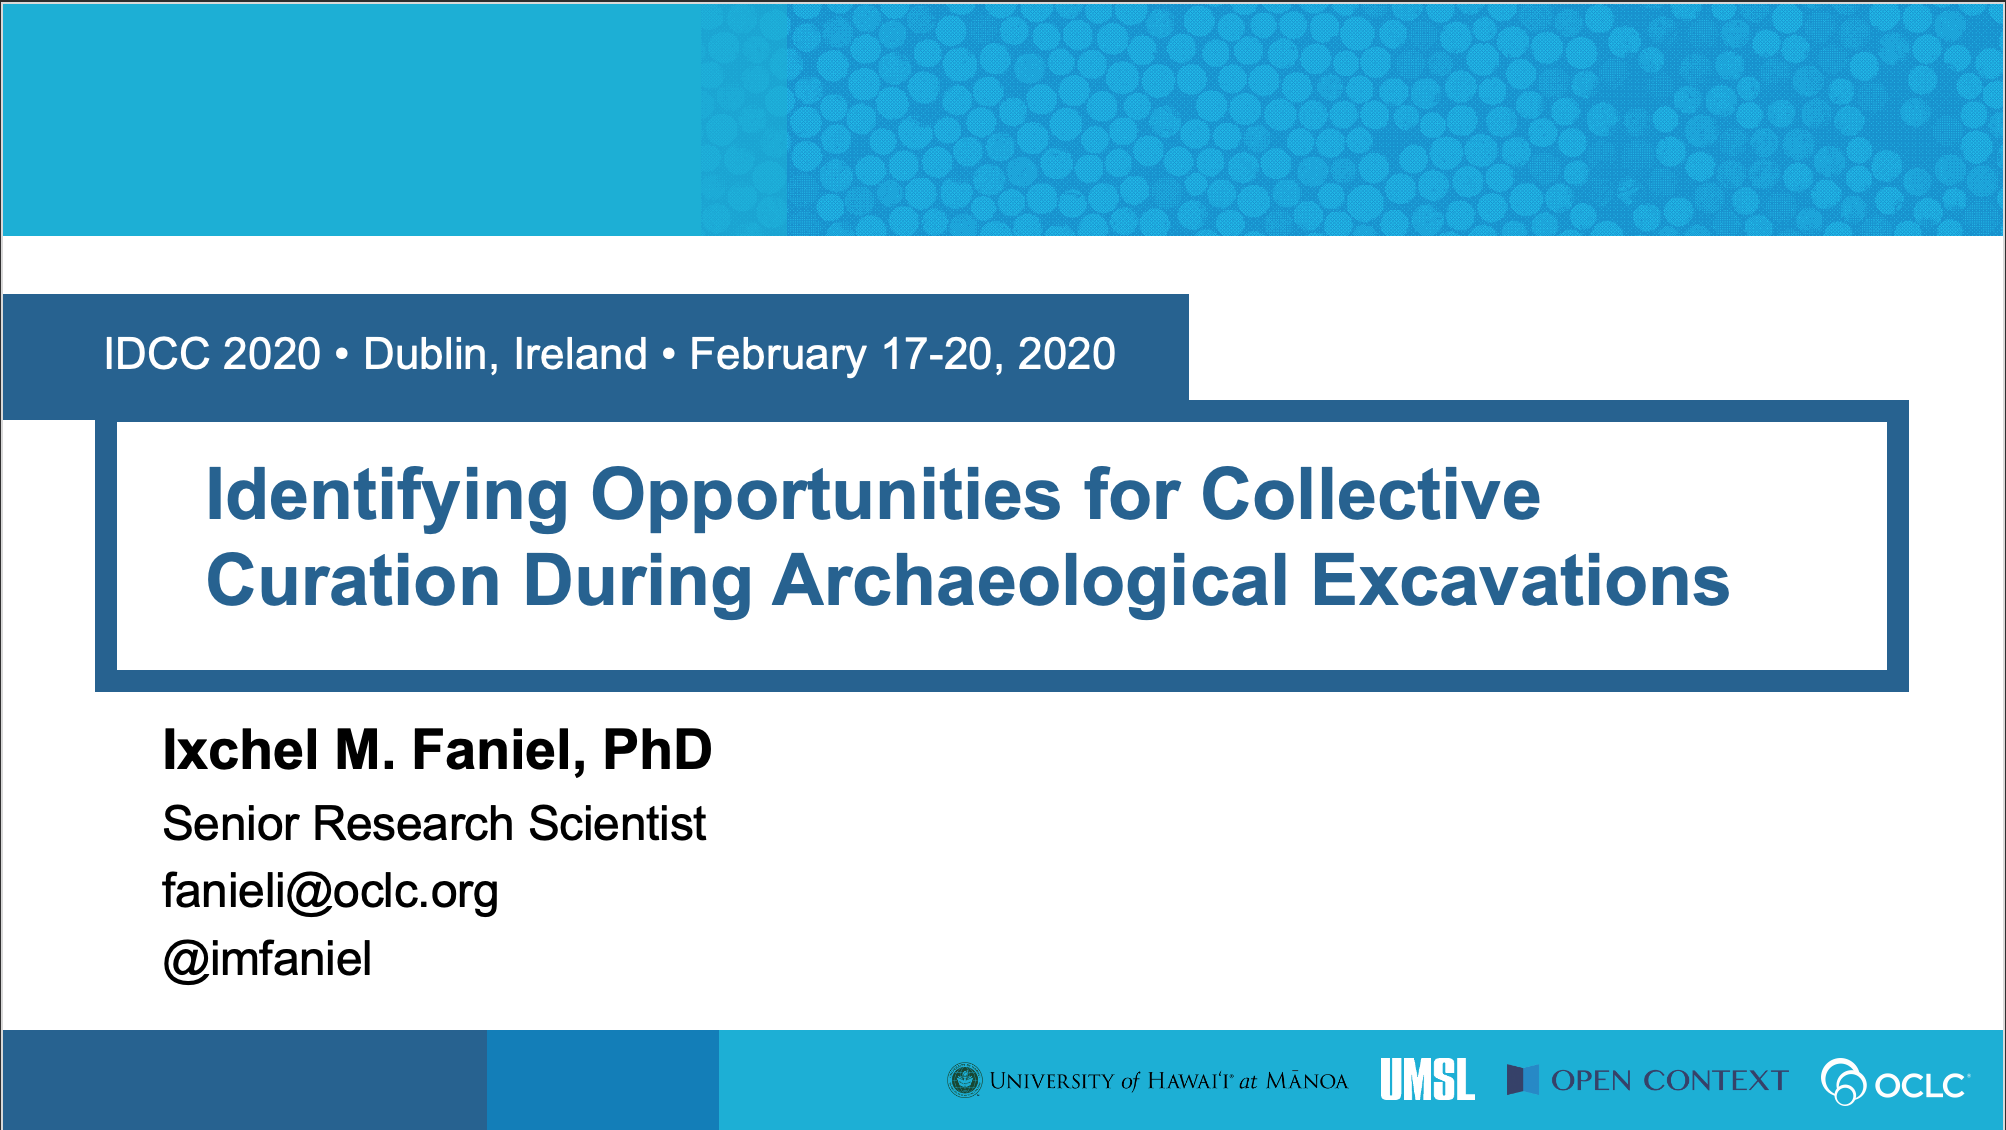 Identifying Opportunities for Collective Curation During Archaeological Excavations